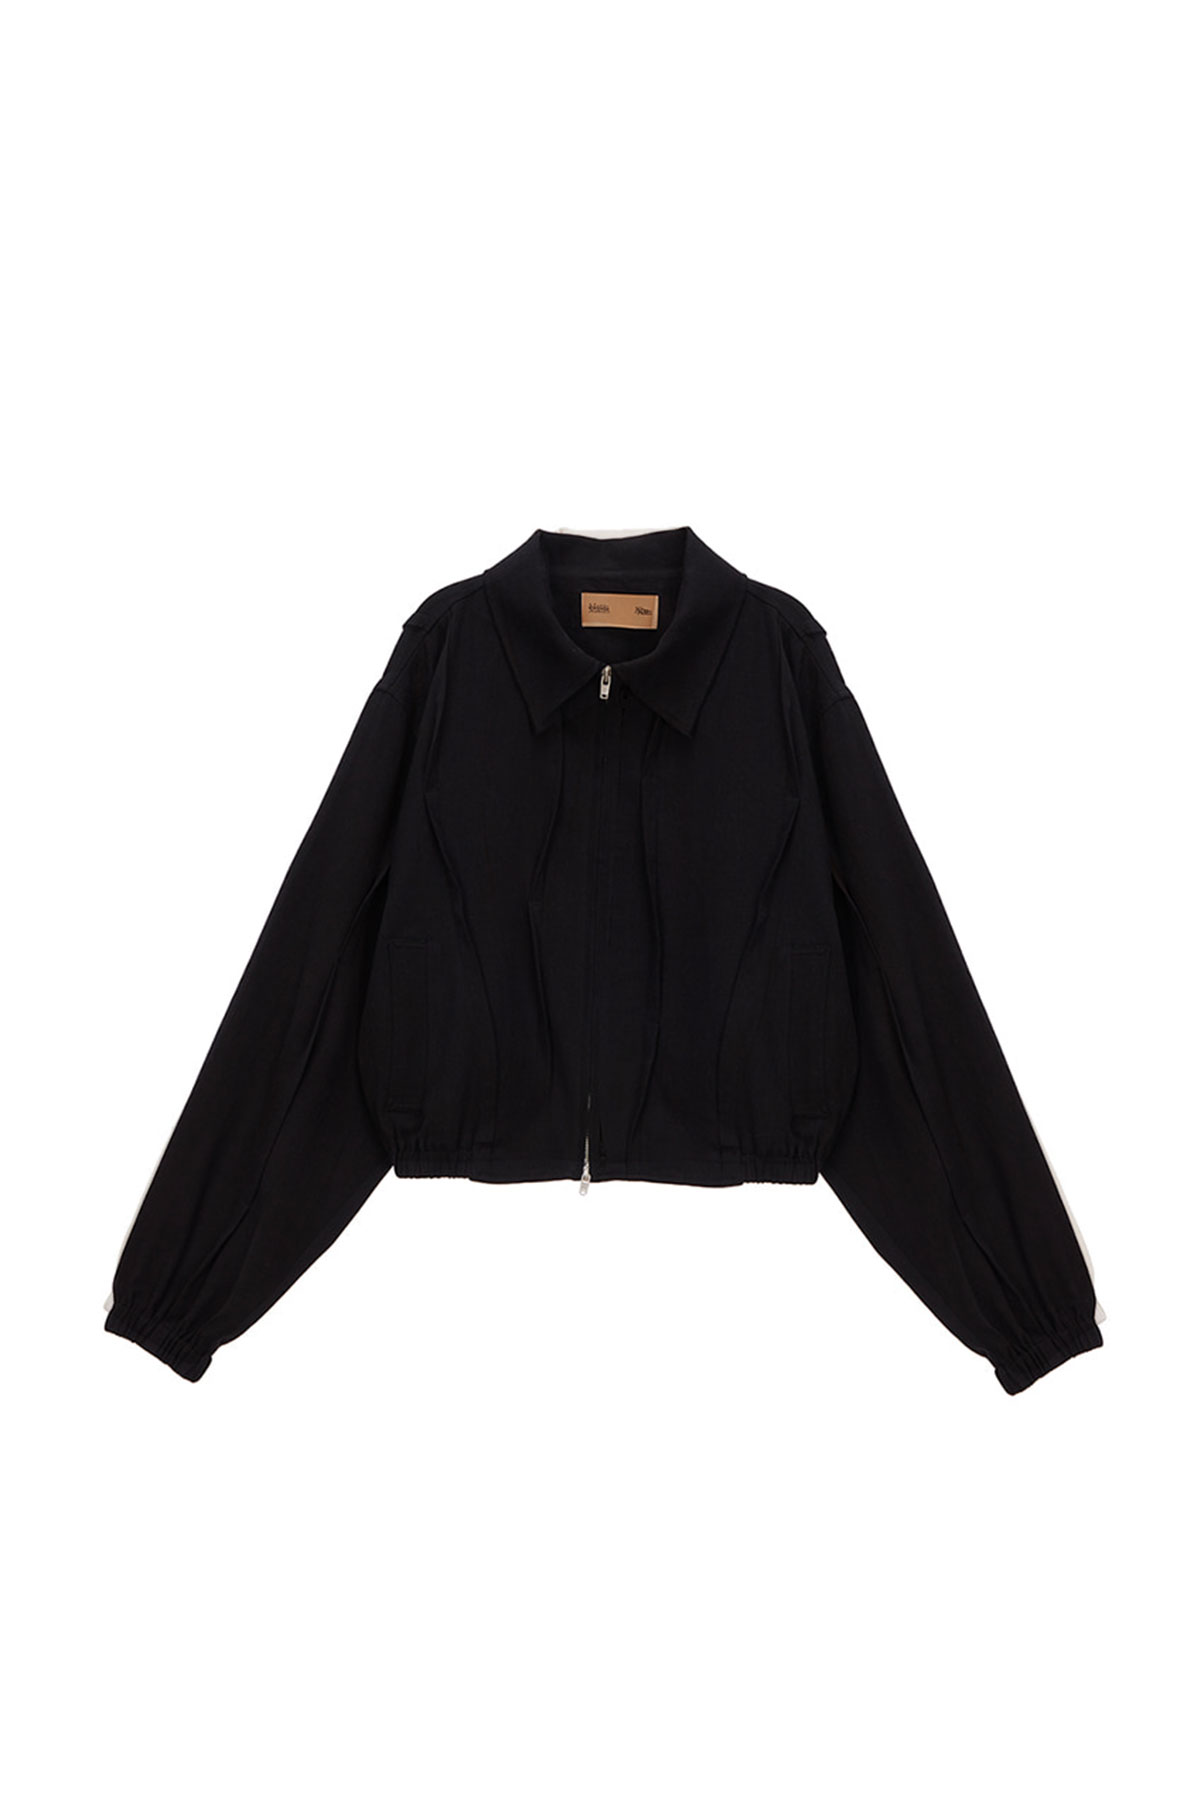 RAW CUTTING ROUGH BOMBER JACKET IN BLACK